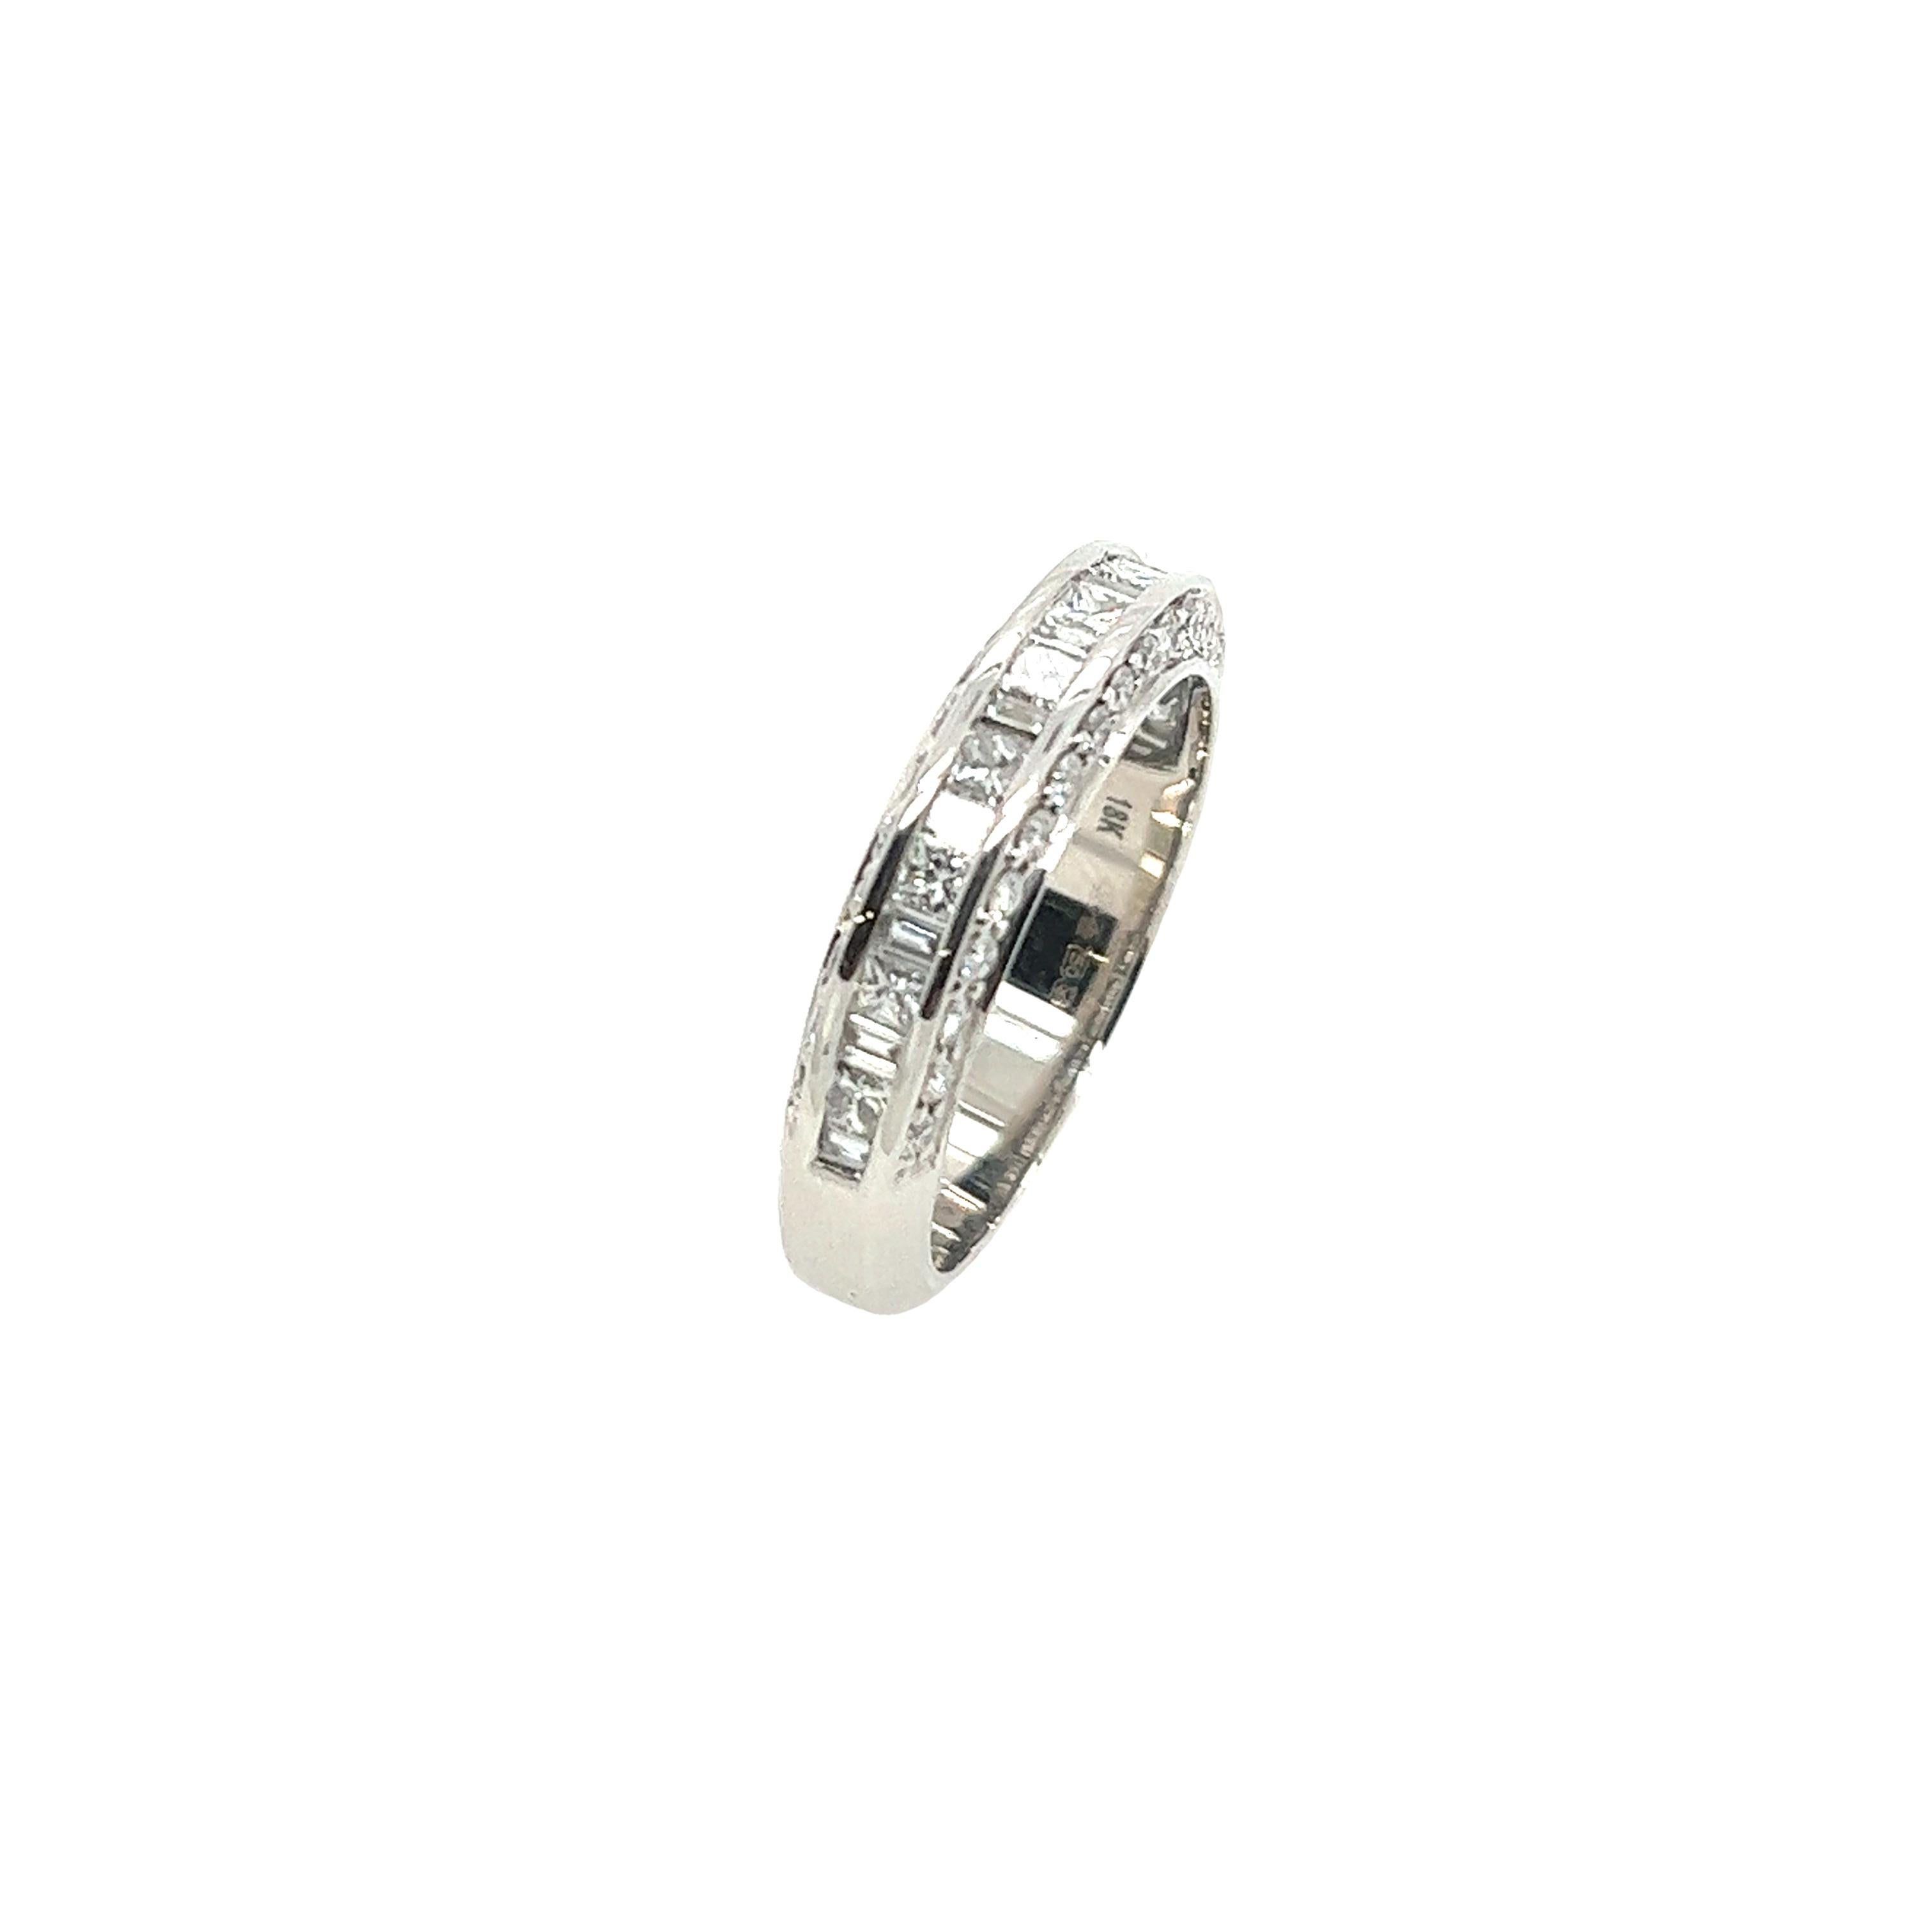 Modern 18ct White Gold Diamond Band Ring Set With 0.90ct Natural Diamonds For Sale